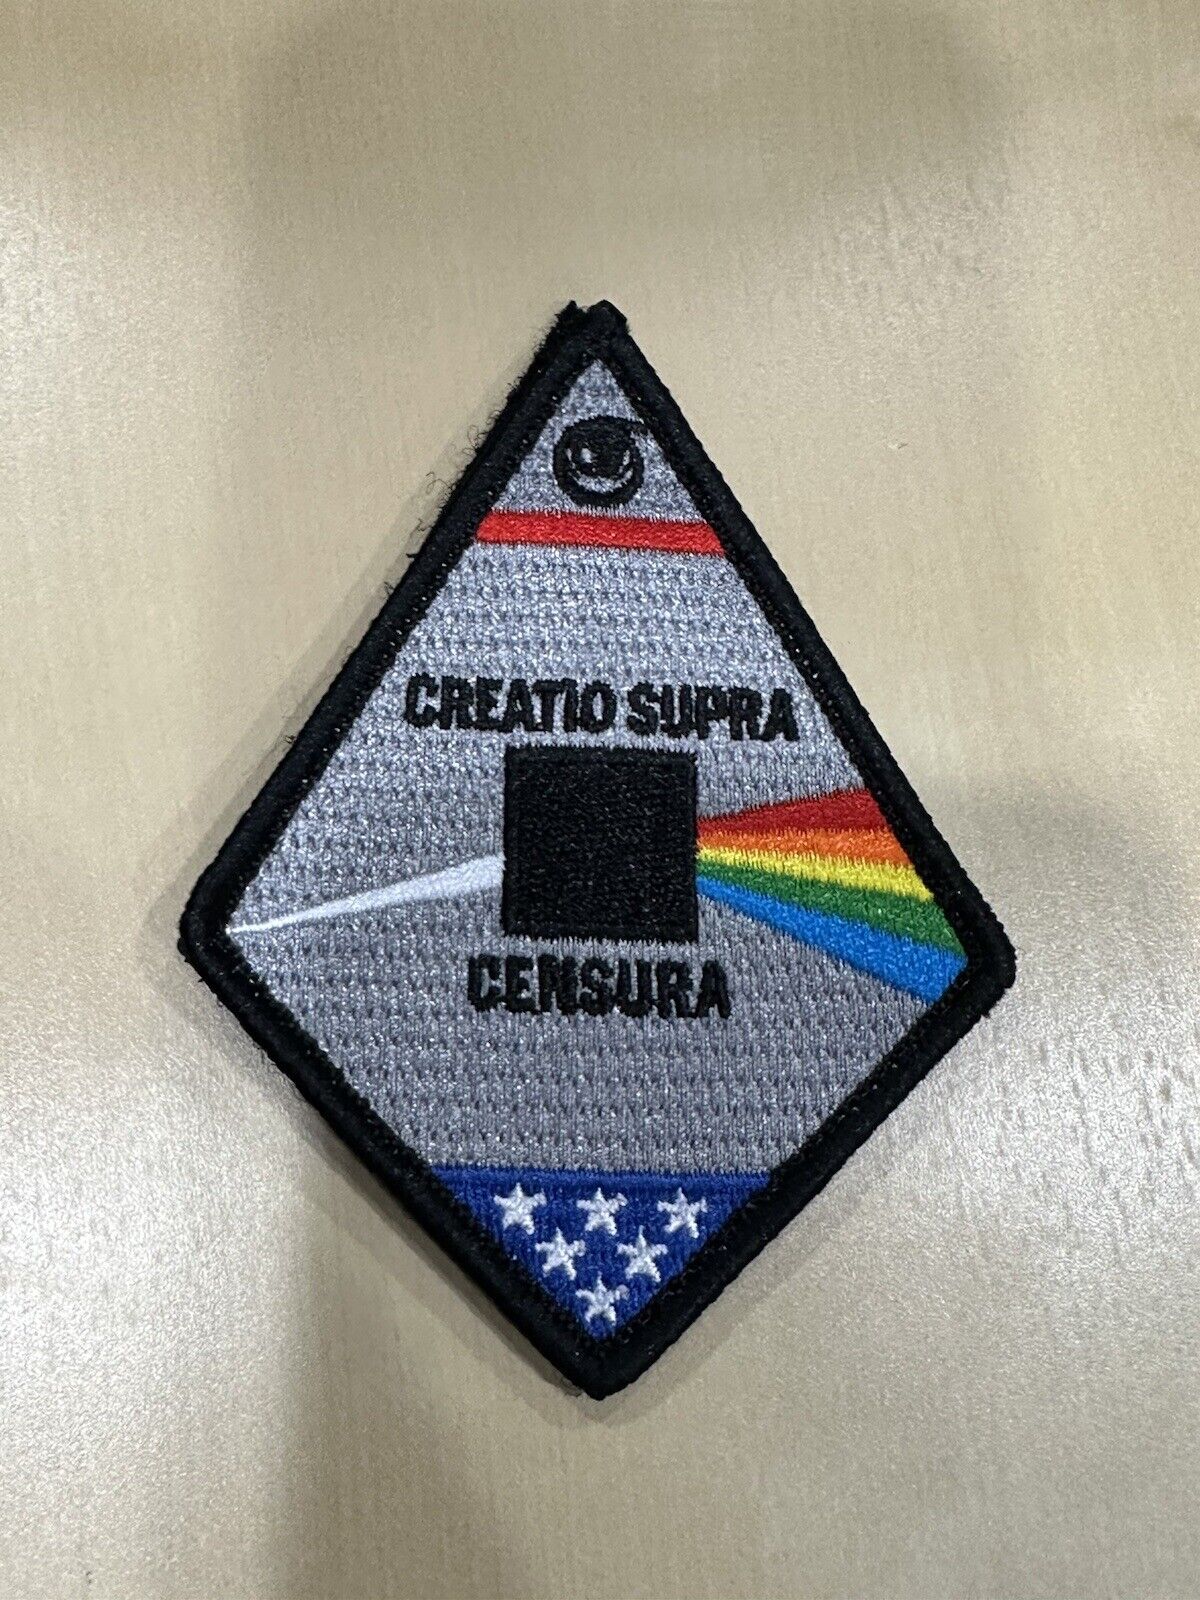 Usaf Patch:  Rare Unknown Classified Unit Patch